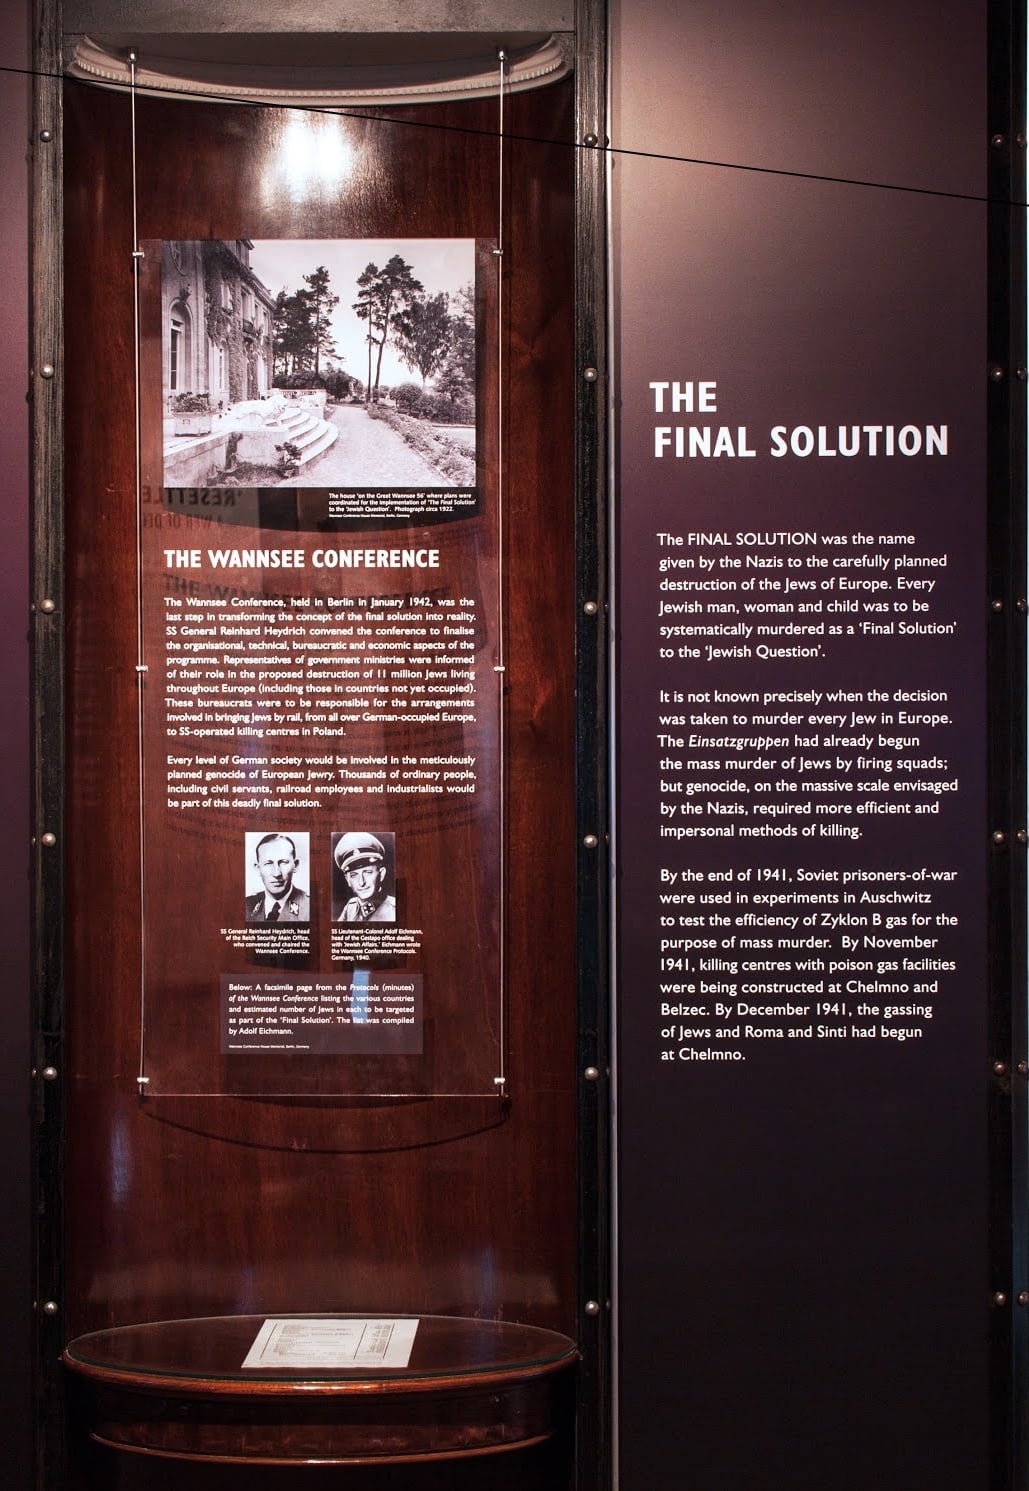 CTHGC The Wannsee Conference